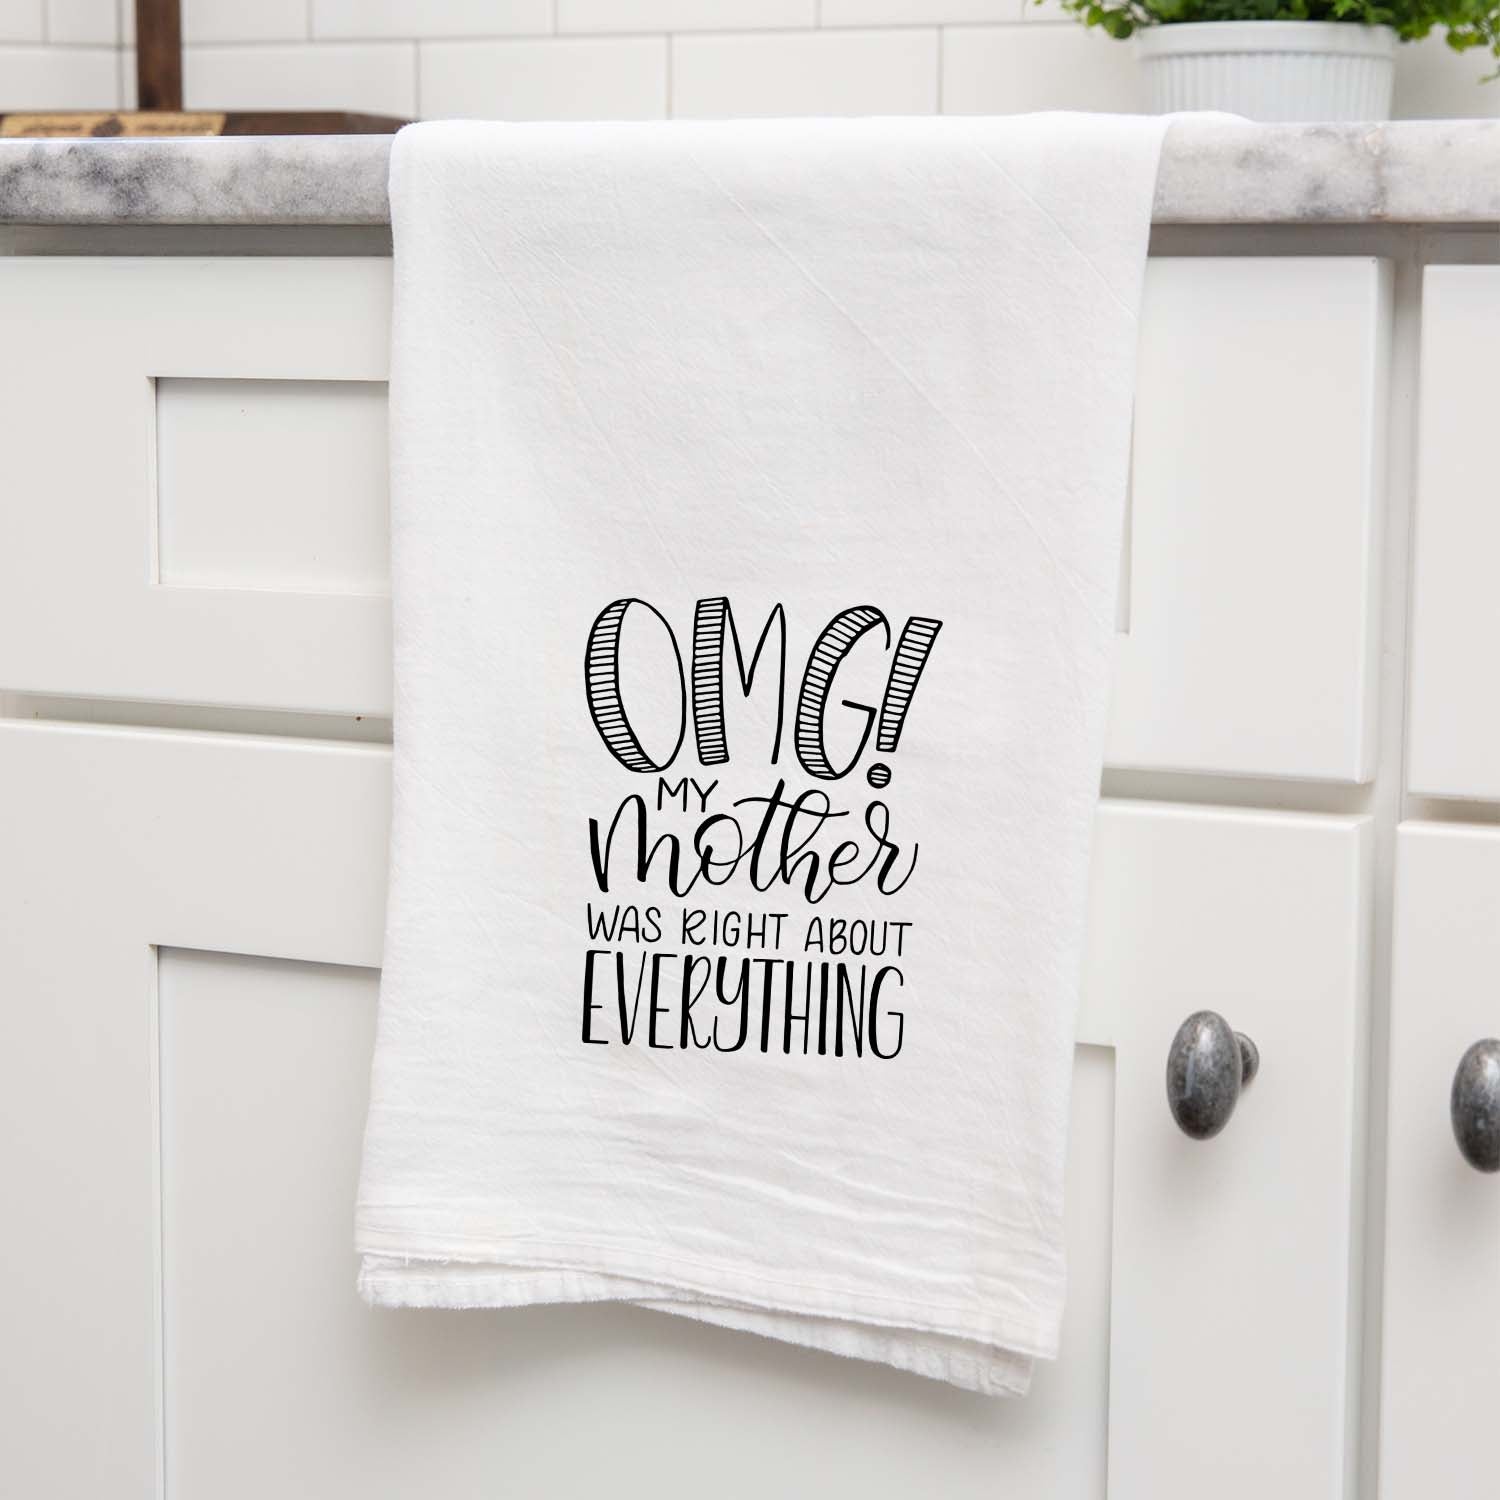 White floursack kitchen towel with black hand lettered illustrated design that says OMG! My mother was right about everything shown folded and hanging from a countertop in a modern kitchen